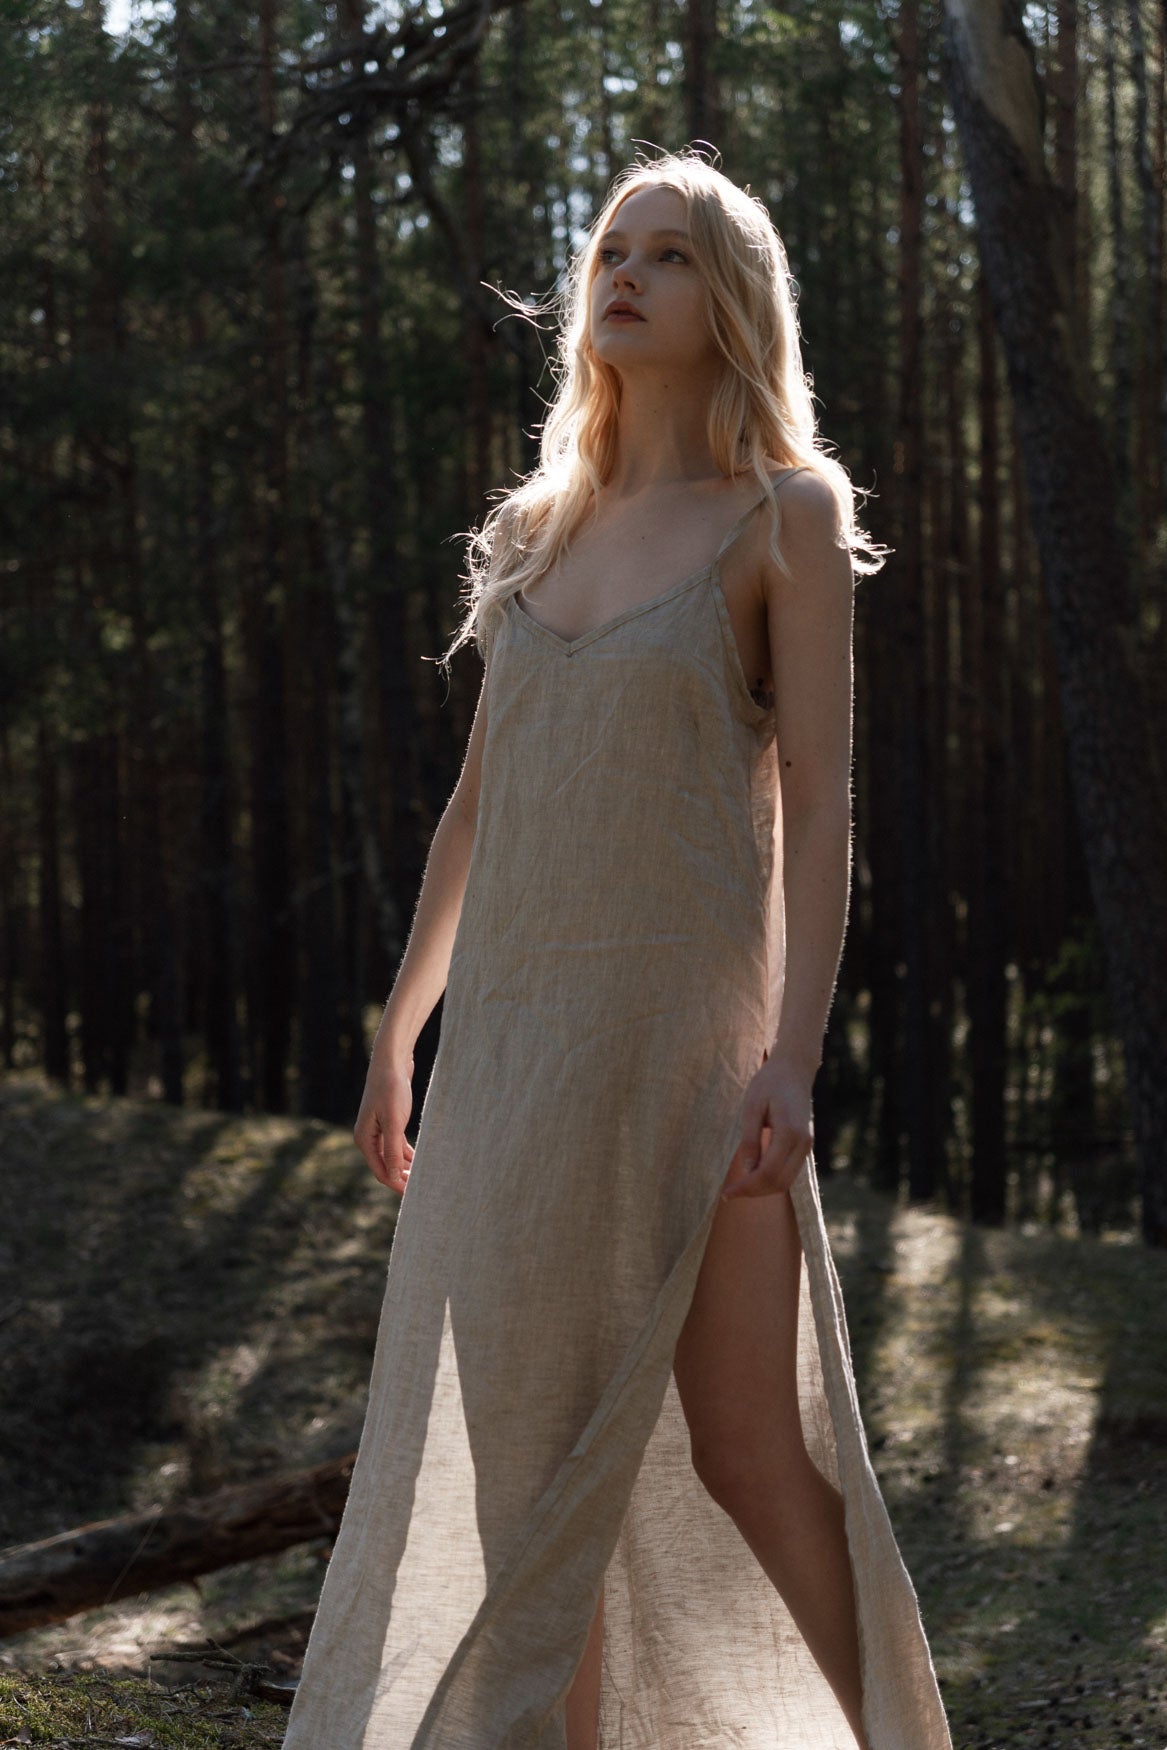 Organic, sustainable, sexy, long beige linen nightwear slip dress with spaghetti straps and splits. This linen lingerie nightdress is natural, comfortable, soft and pure. This sleepwear nightgown is a conscious and healthy choice for your body and environment.